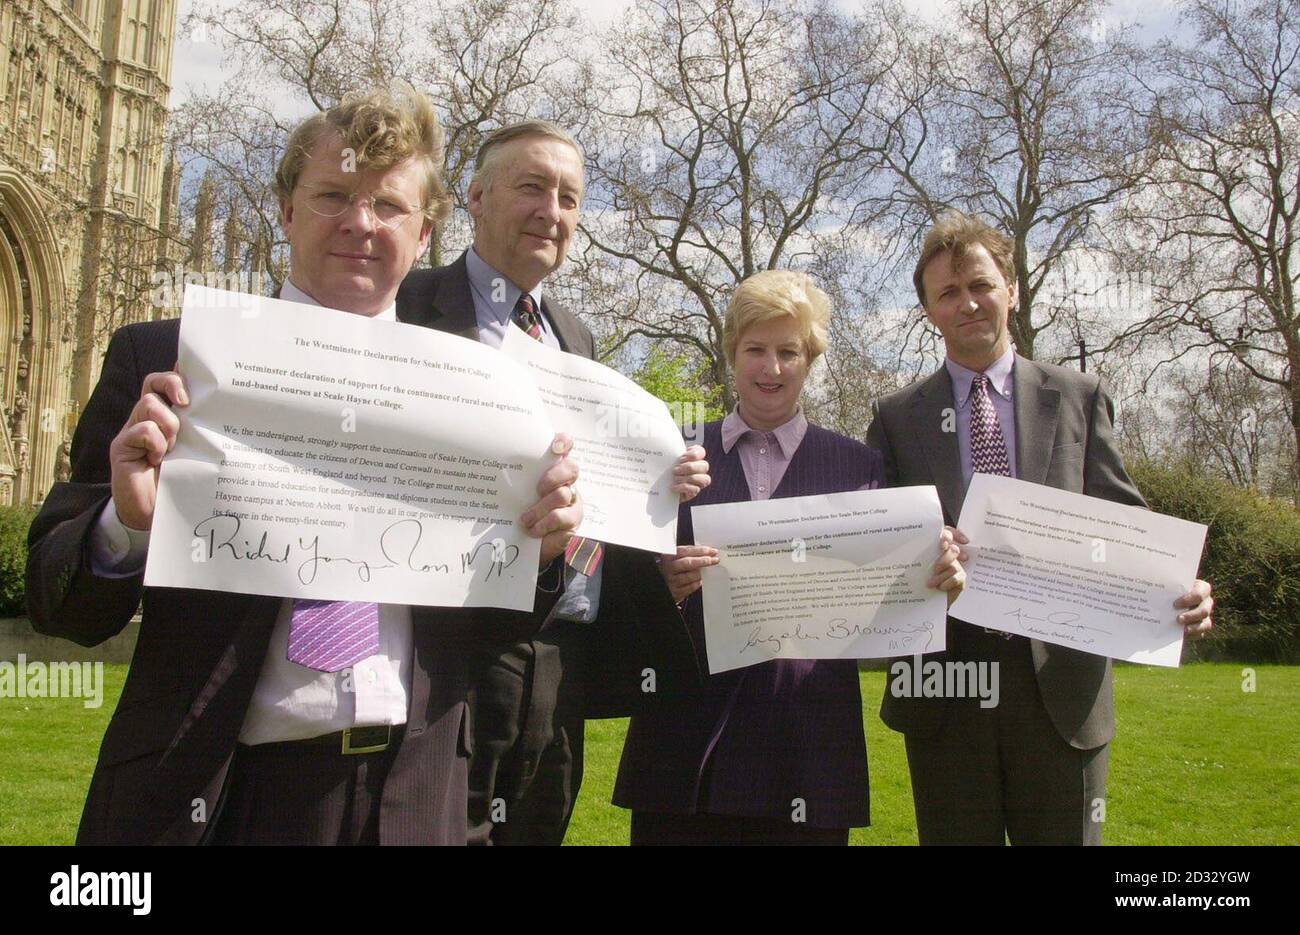 (Left to right) Richard Younger-Ross, MP for Teignbridge, in Devon, Lord Livsey of Talgarth, Angela Browning, MP for Tiverton and Honiton, and Andrew George, MP for St Ives,   * ...show their support for the continuance of rural and agricultural land-based courses at Seale Hayne College in Devon. The four assembled on Abingdon Green in Westminster, central London, and said they were working with local communities in Devon and Cornwall to try and prevent the college's closure. Stock Photo